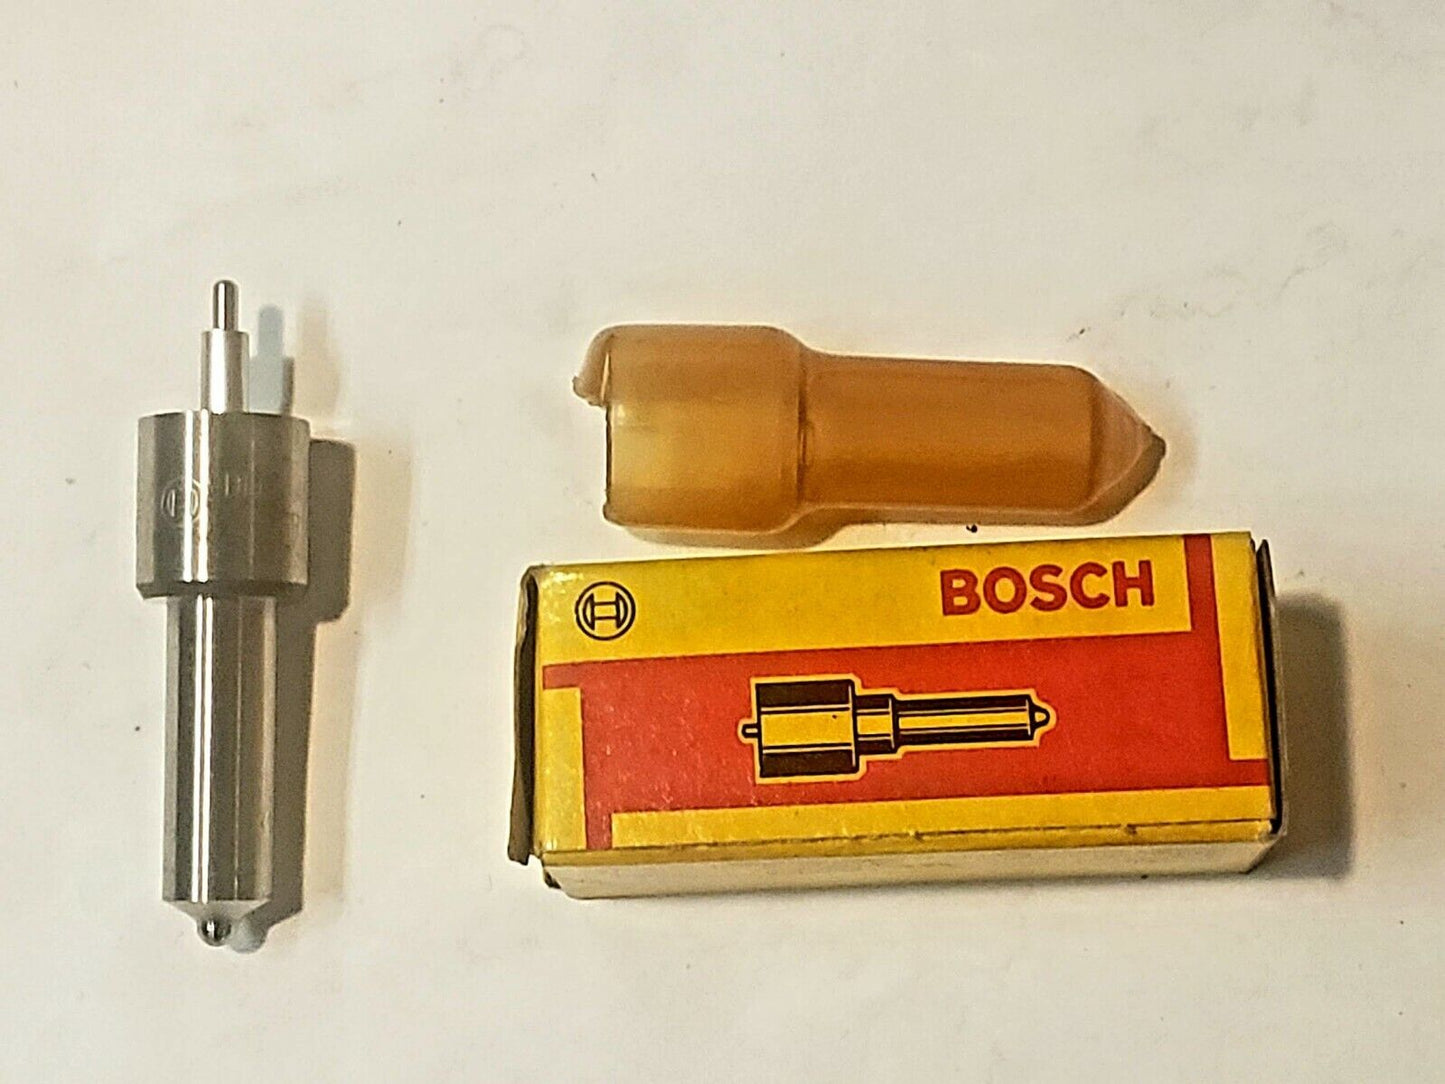 BOSCH INJECTOR NOZZLE 0433171138 / DLLA155P156 for MACK INJECTOR 736GB337P4